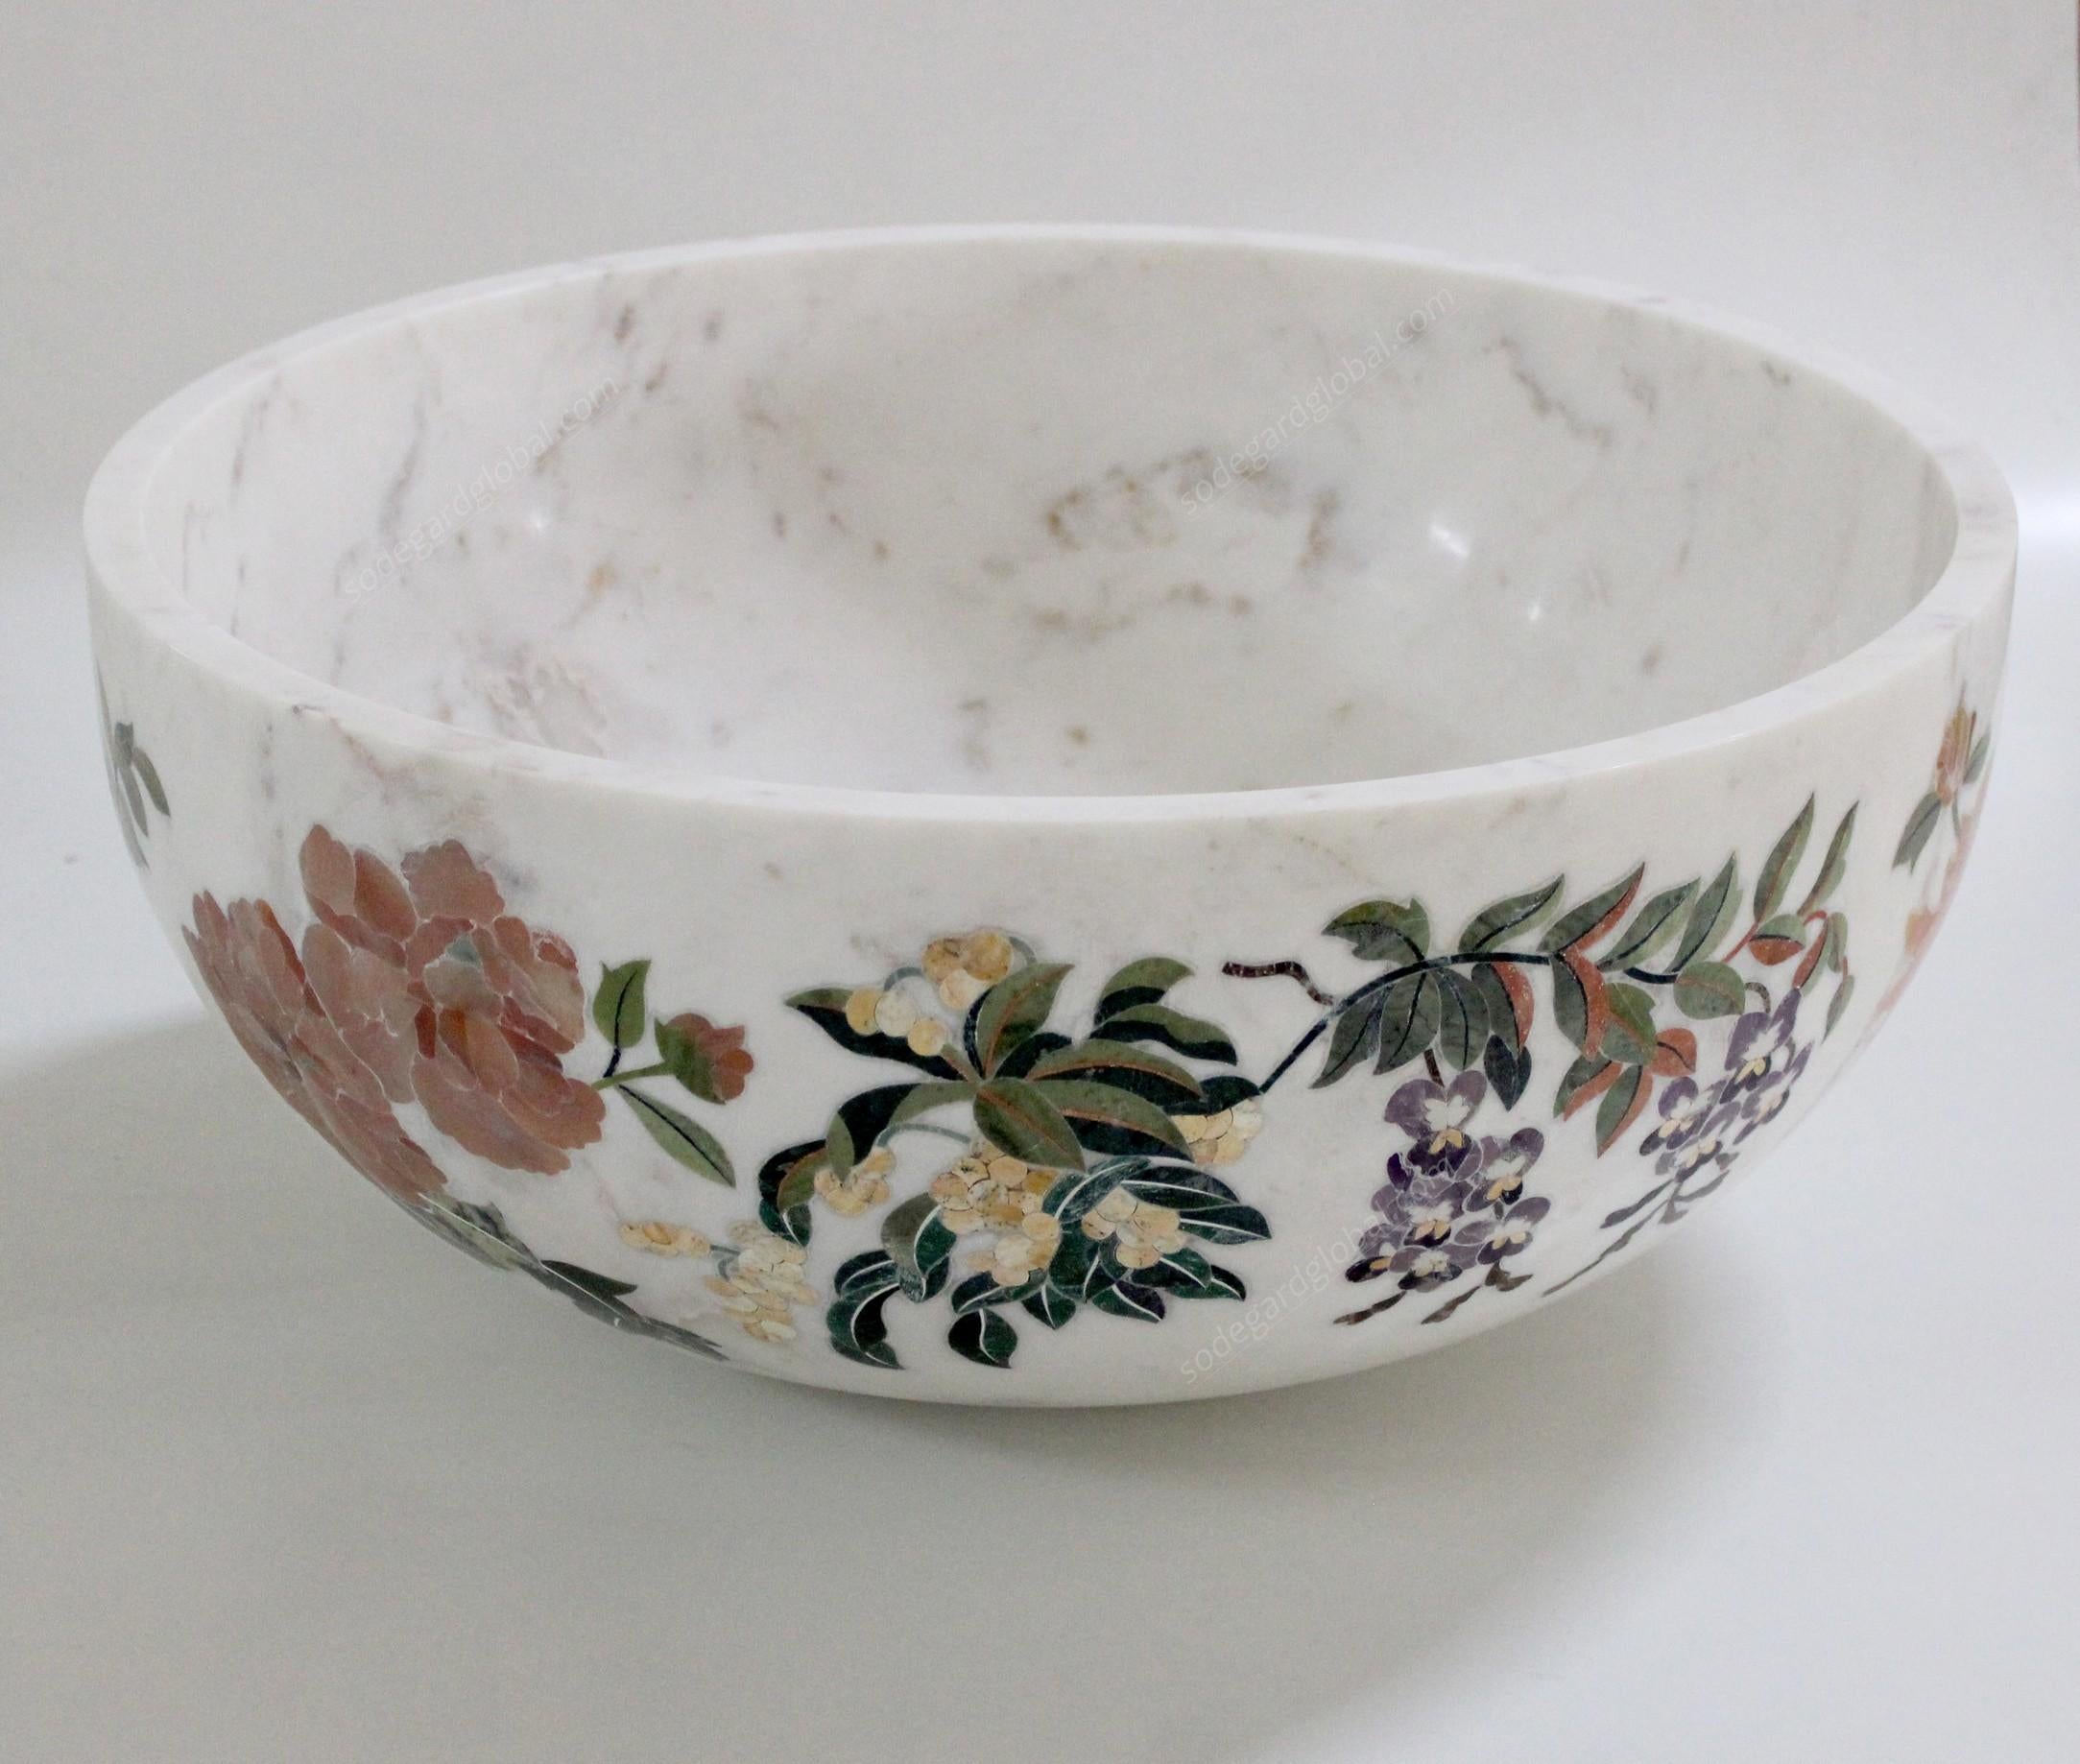 Handmade Ornamenti Bowl Inlay in White Marble by Stephanie Odegard In New Condition For Sale In New York, NY